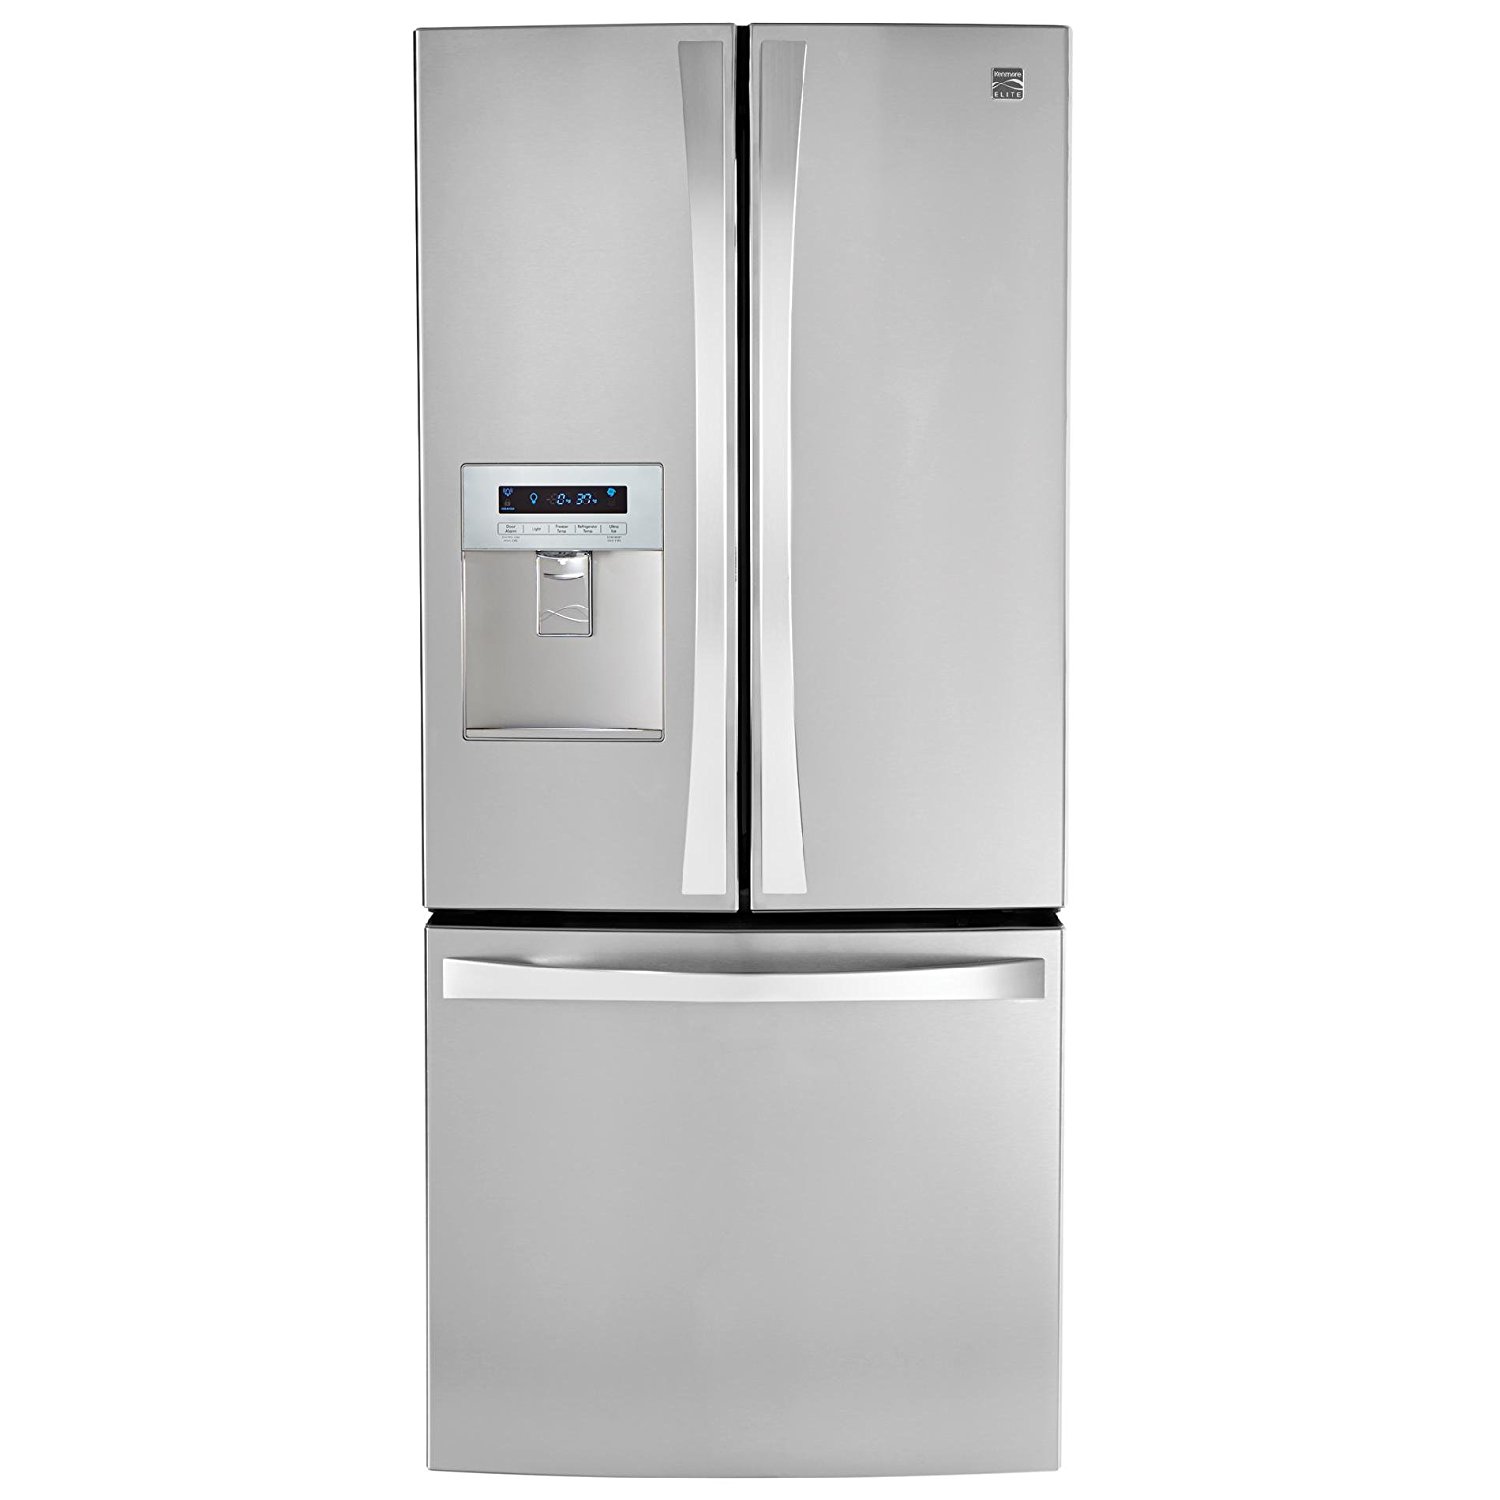 Kenmore Elite 71323 21.8 cu. ft. Wide French Door Bottom Freezer Refrigerator with Dispenser in Stainless Steel, includes delivery and hookup (Available in select cities only)